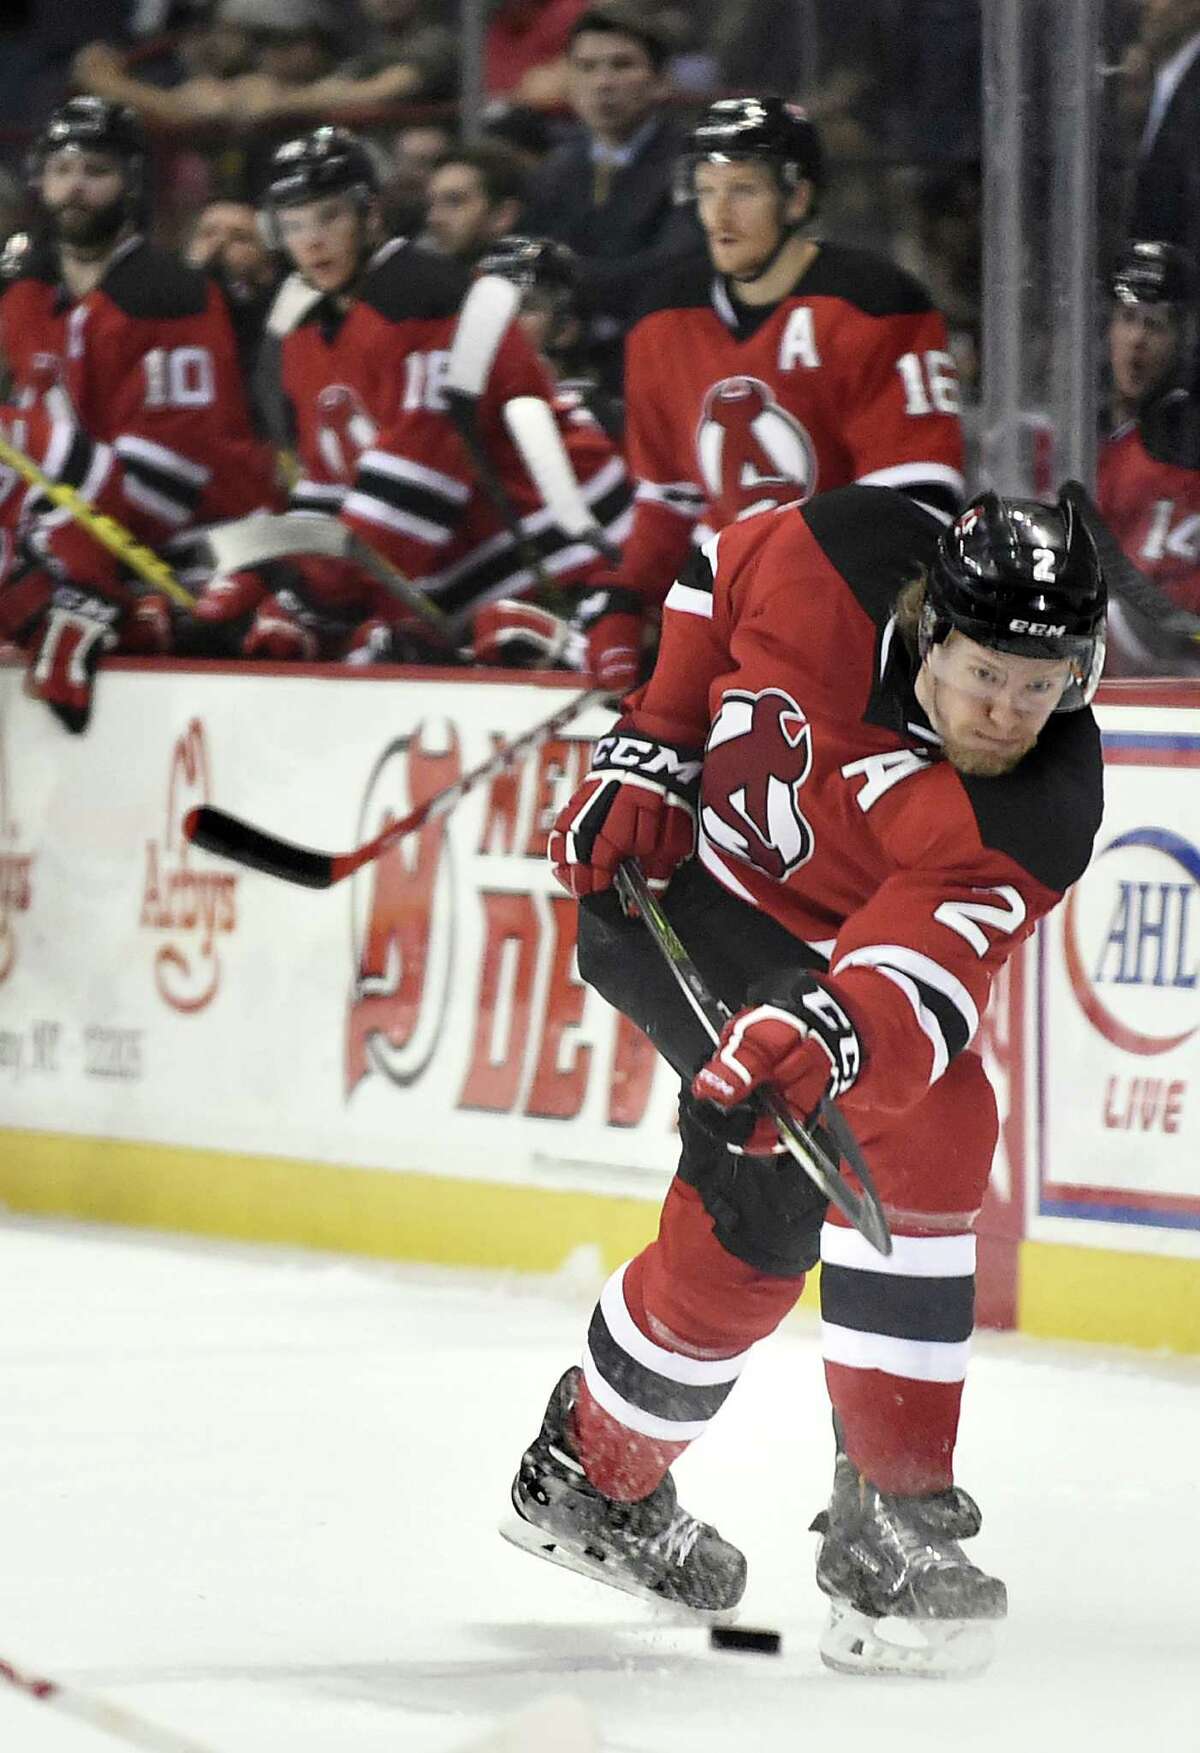 Devils' Seth Helgeson shoots the puck during Game 5 of the American Hockey League quarterfinal playoff series against the Marlies on Thursday, May 12, 2016, at Times Union Center in Albany, N.Y. (Cindy Schultz / Times Union) ORG XMIT: MER2016102715305713 ORG XMIT: MER2016102715344231